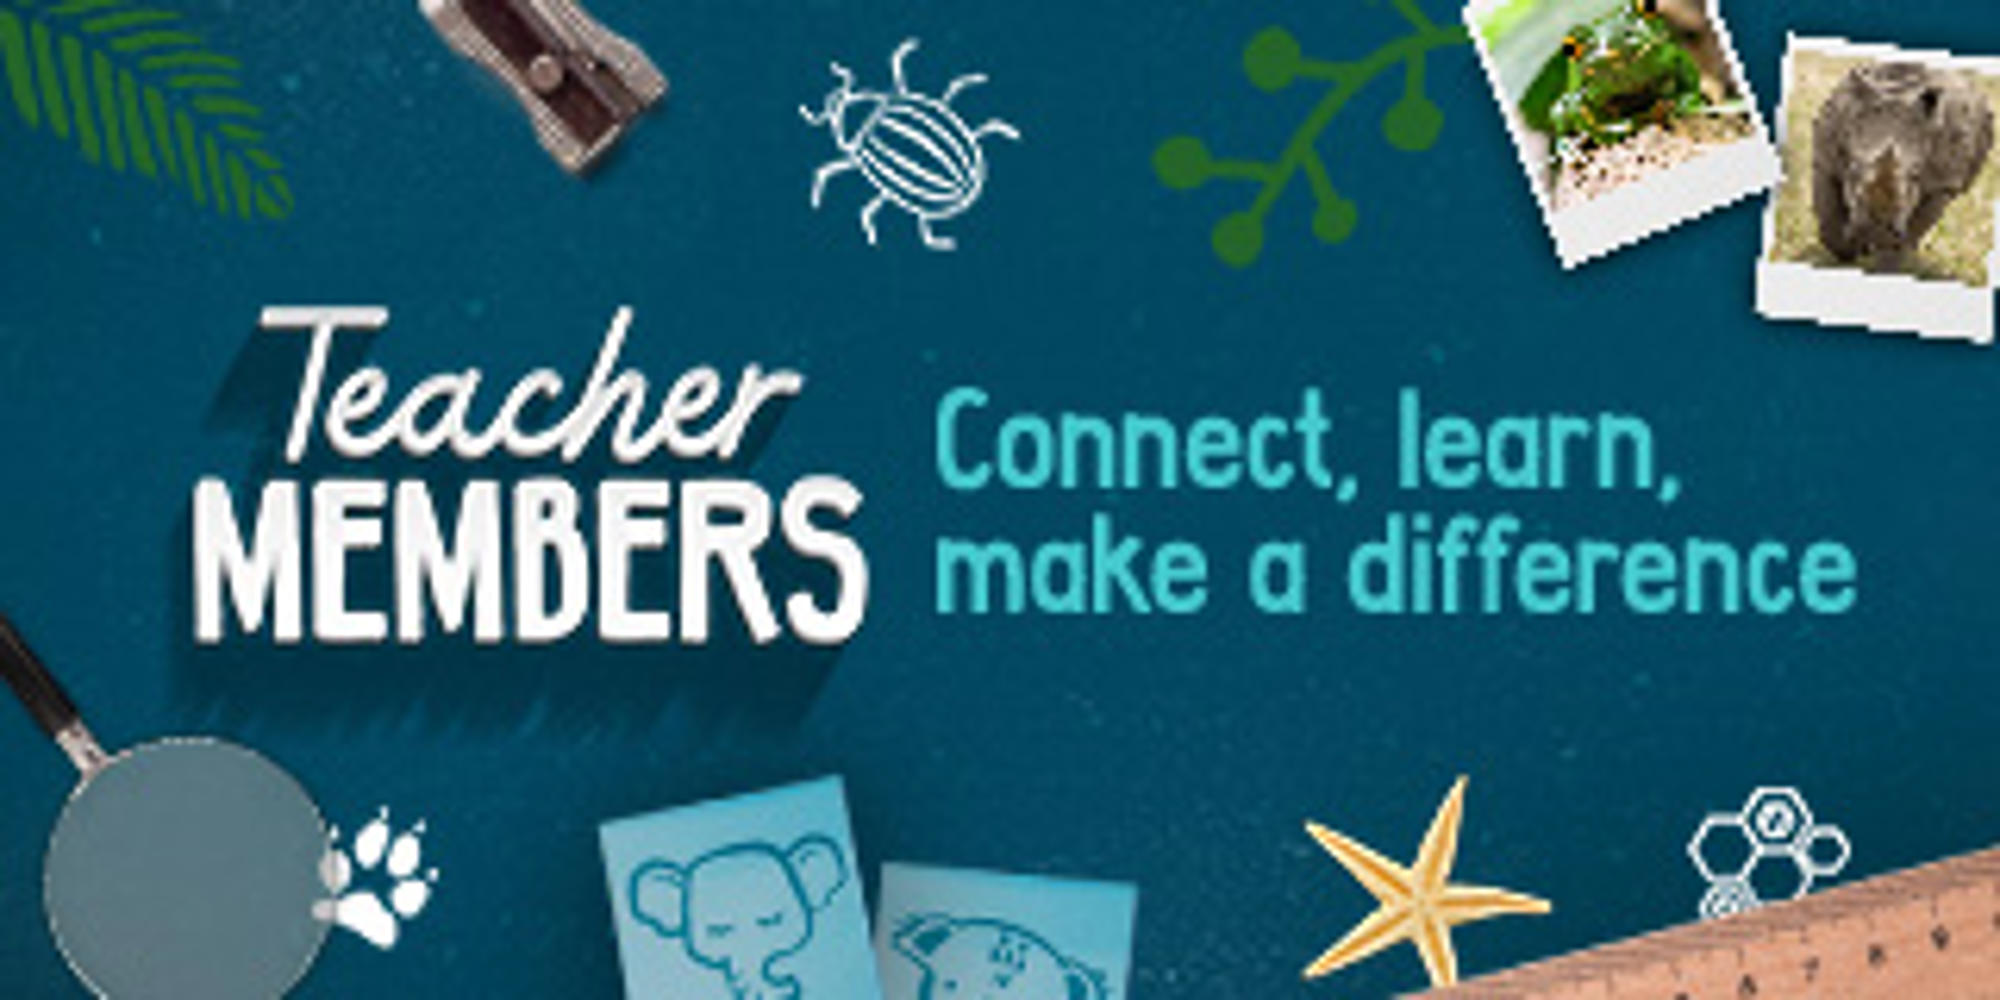 Teacher Membership, Connet, Learn, make a difference